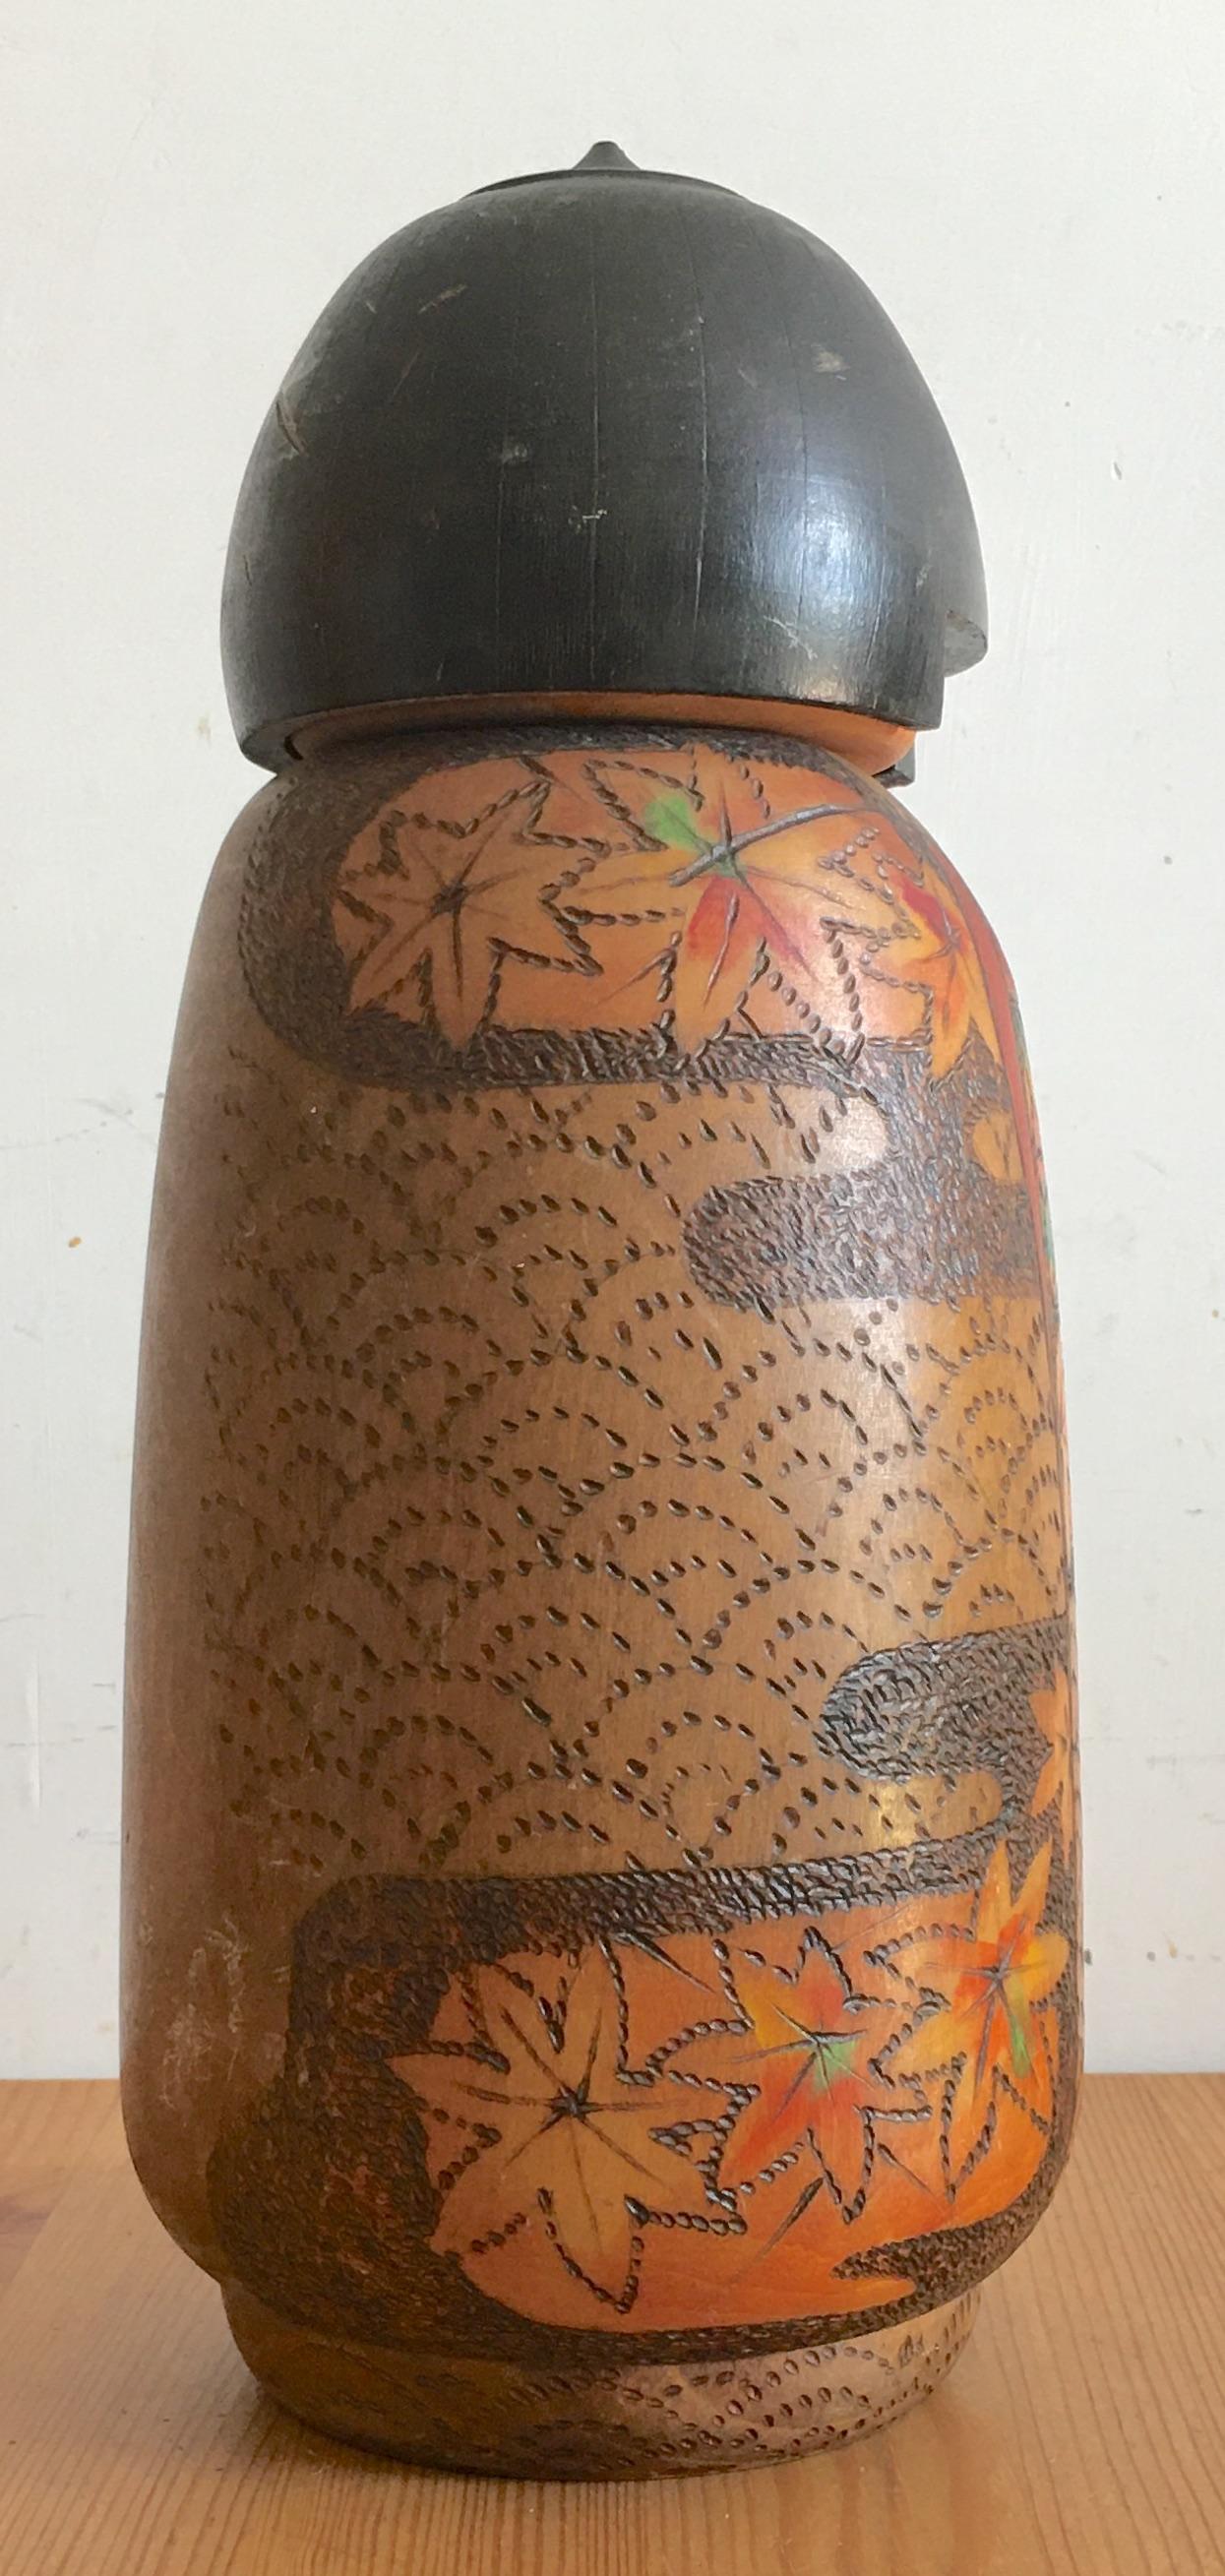 It is easily recognizable as the work of the famous Kobayashi. His Kokeshi are often heavy and large round pieces like this one. He is a Kokeshi Artisan Prime Minister Award winner and his kokeshi are collected all over the world. Kobayashi was born